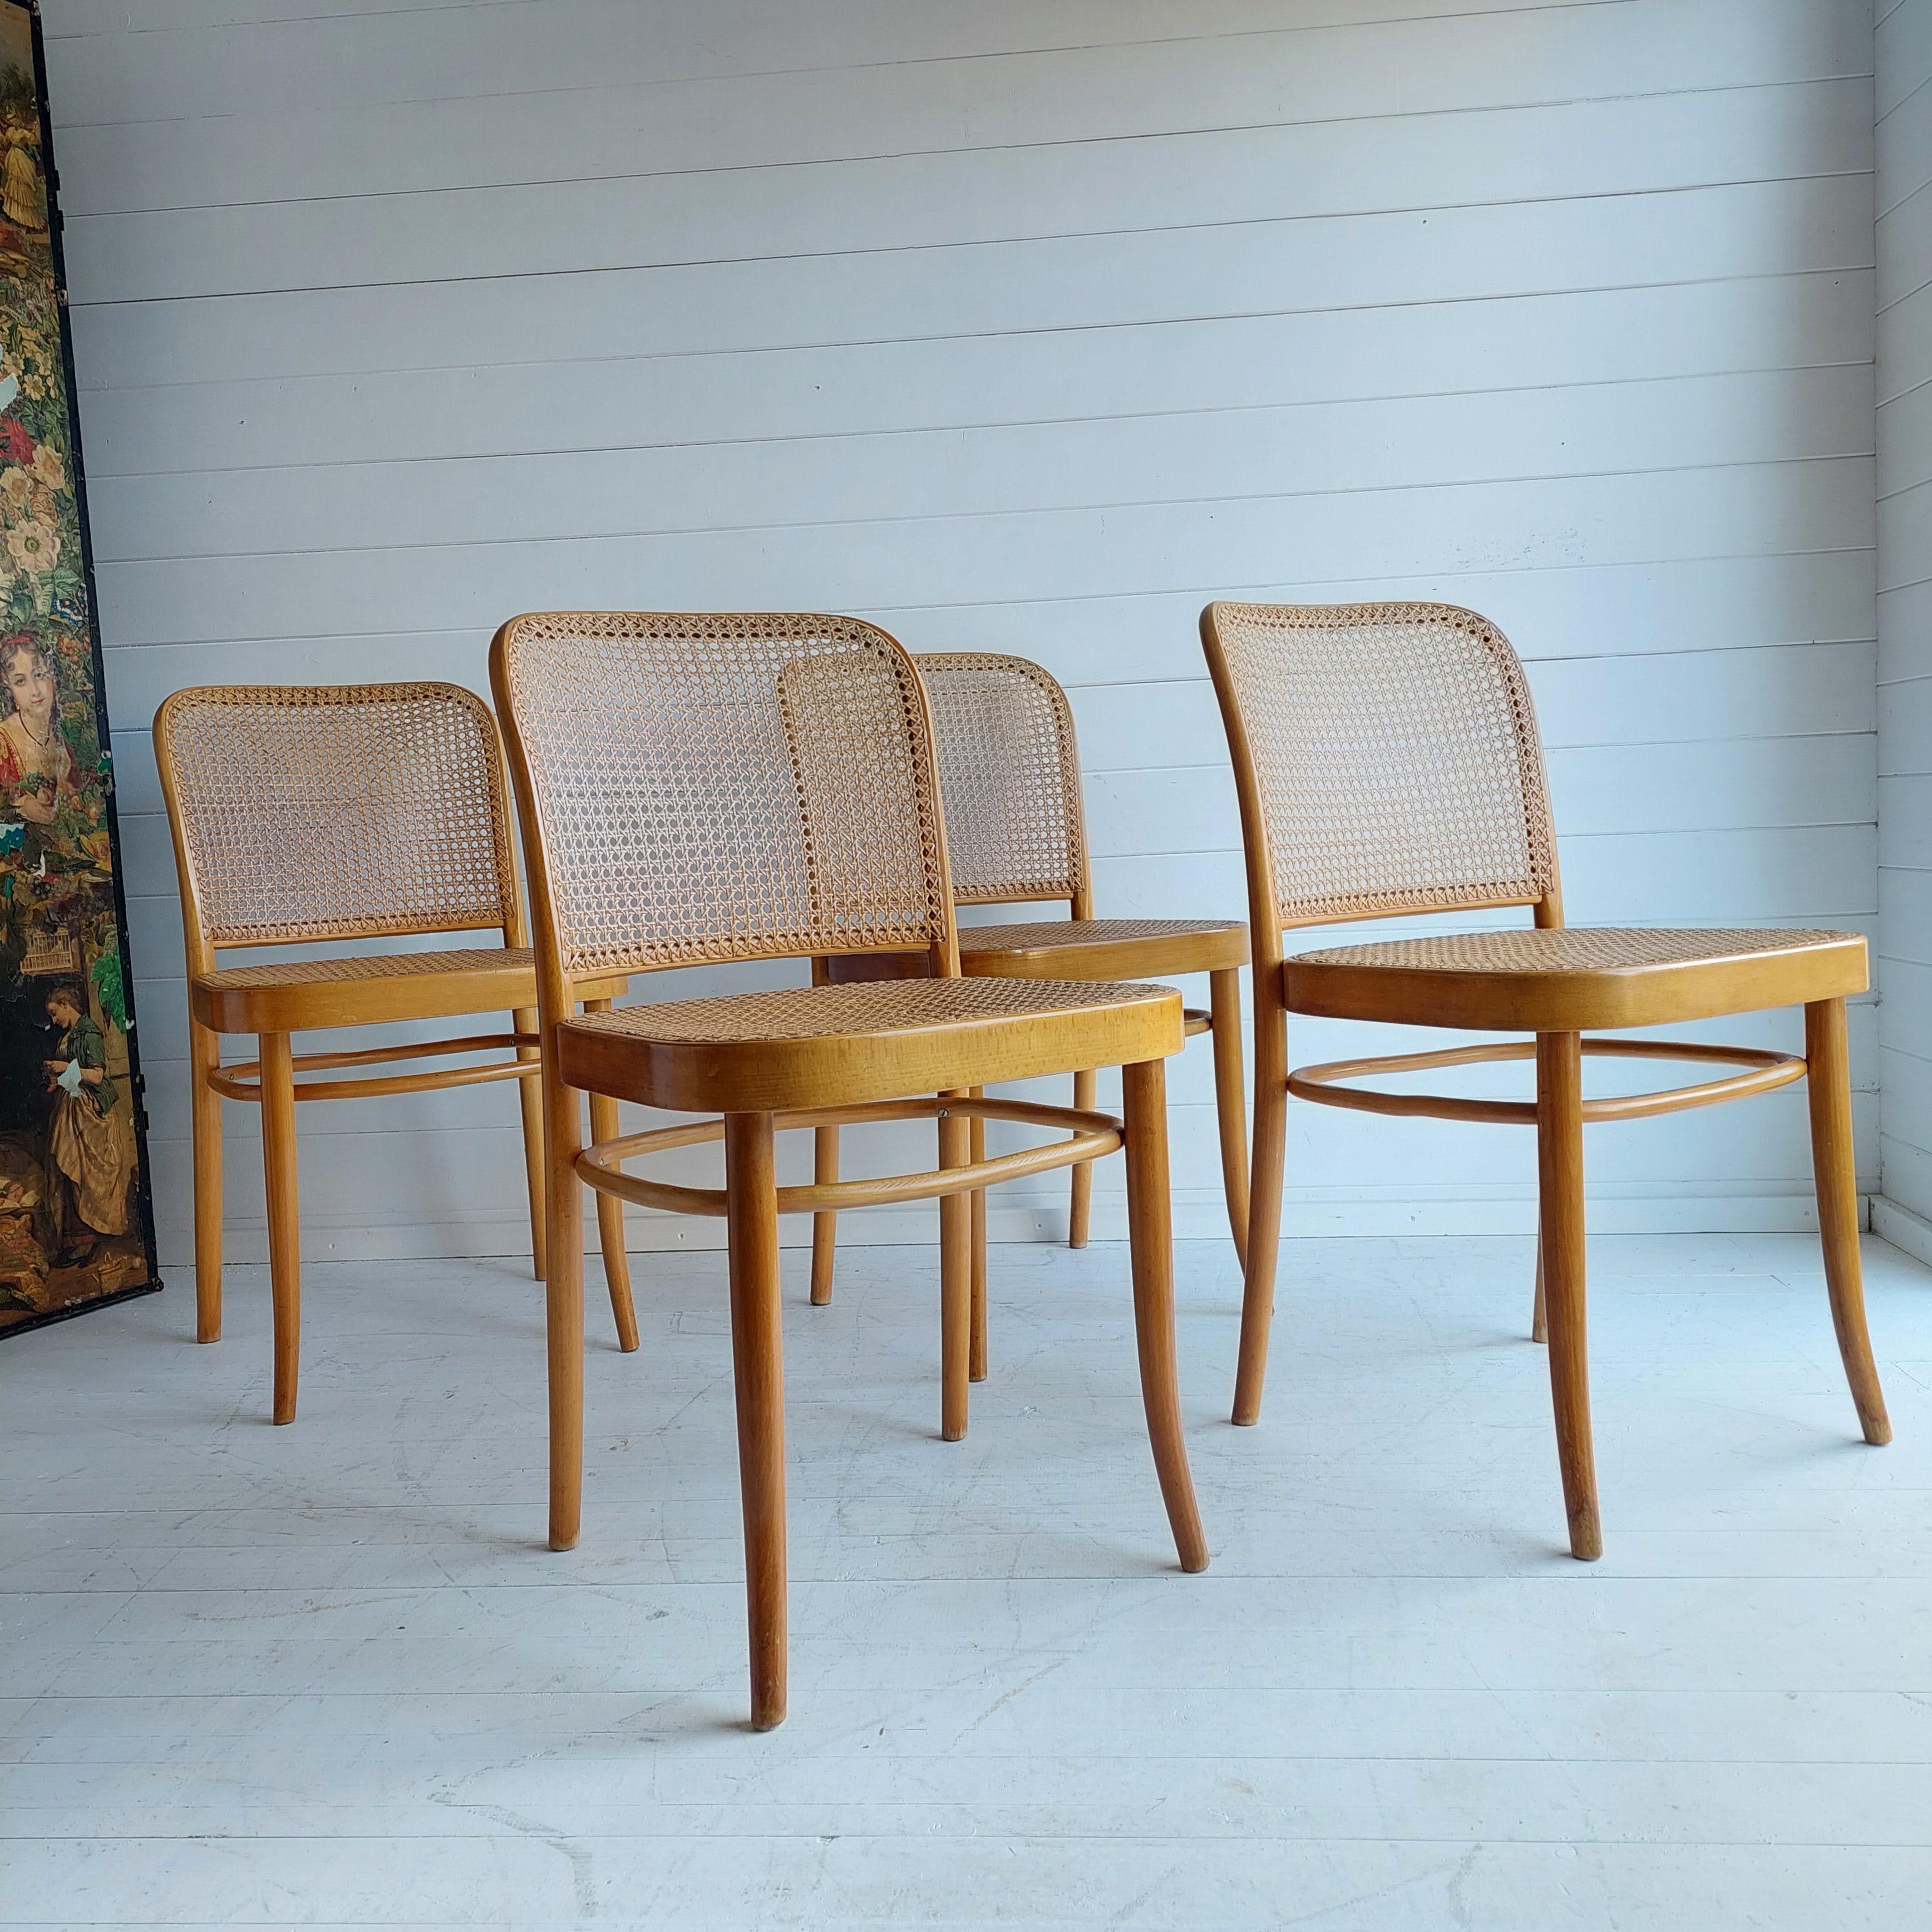 Stylish Set of 4 Josef Hoffmann Style ‘Prague' Model 811 Chairs, circa 1970s.
Originally designed by Hoffman for Thonet in the 1920s, these chairs were produced later under license in Czechoslovakia by Ligna Drevounia. (makers mark to